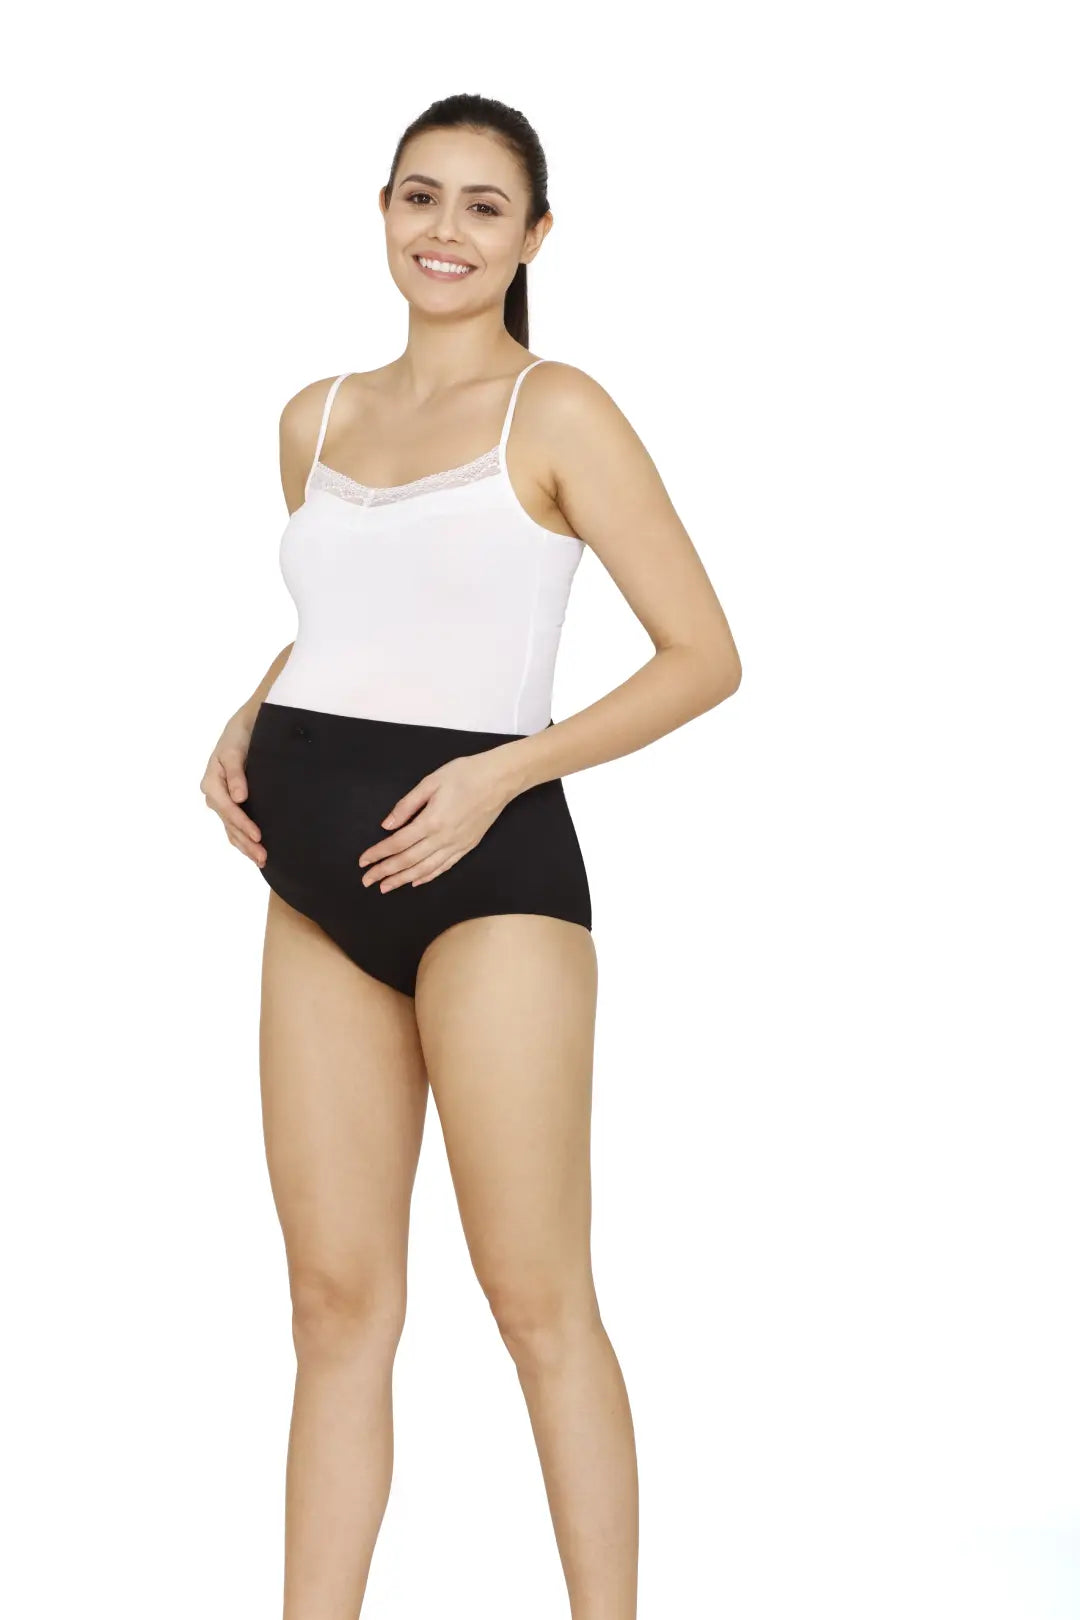 Pregnancy and Maternity Panty | Pregnancy Underwear for C Section